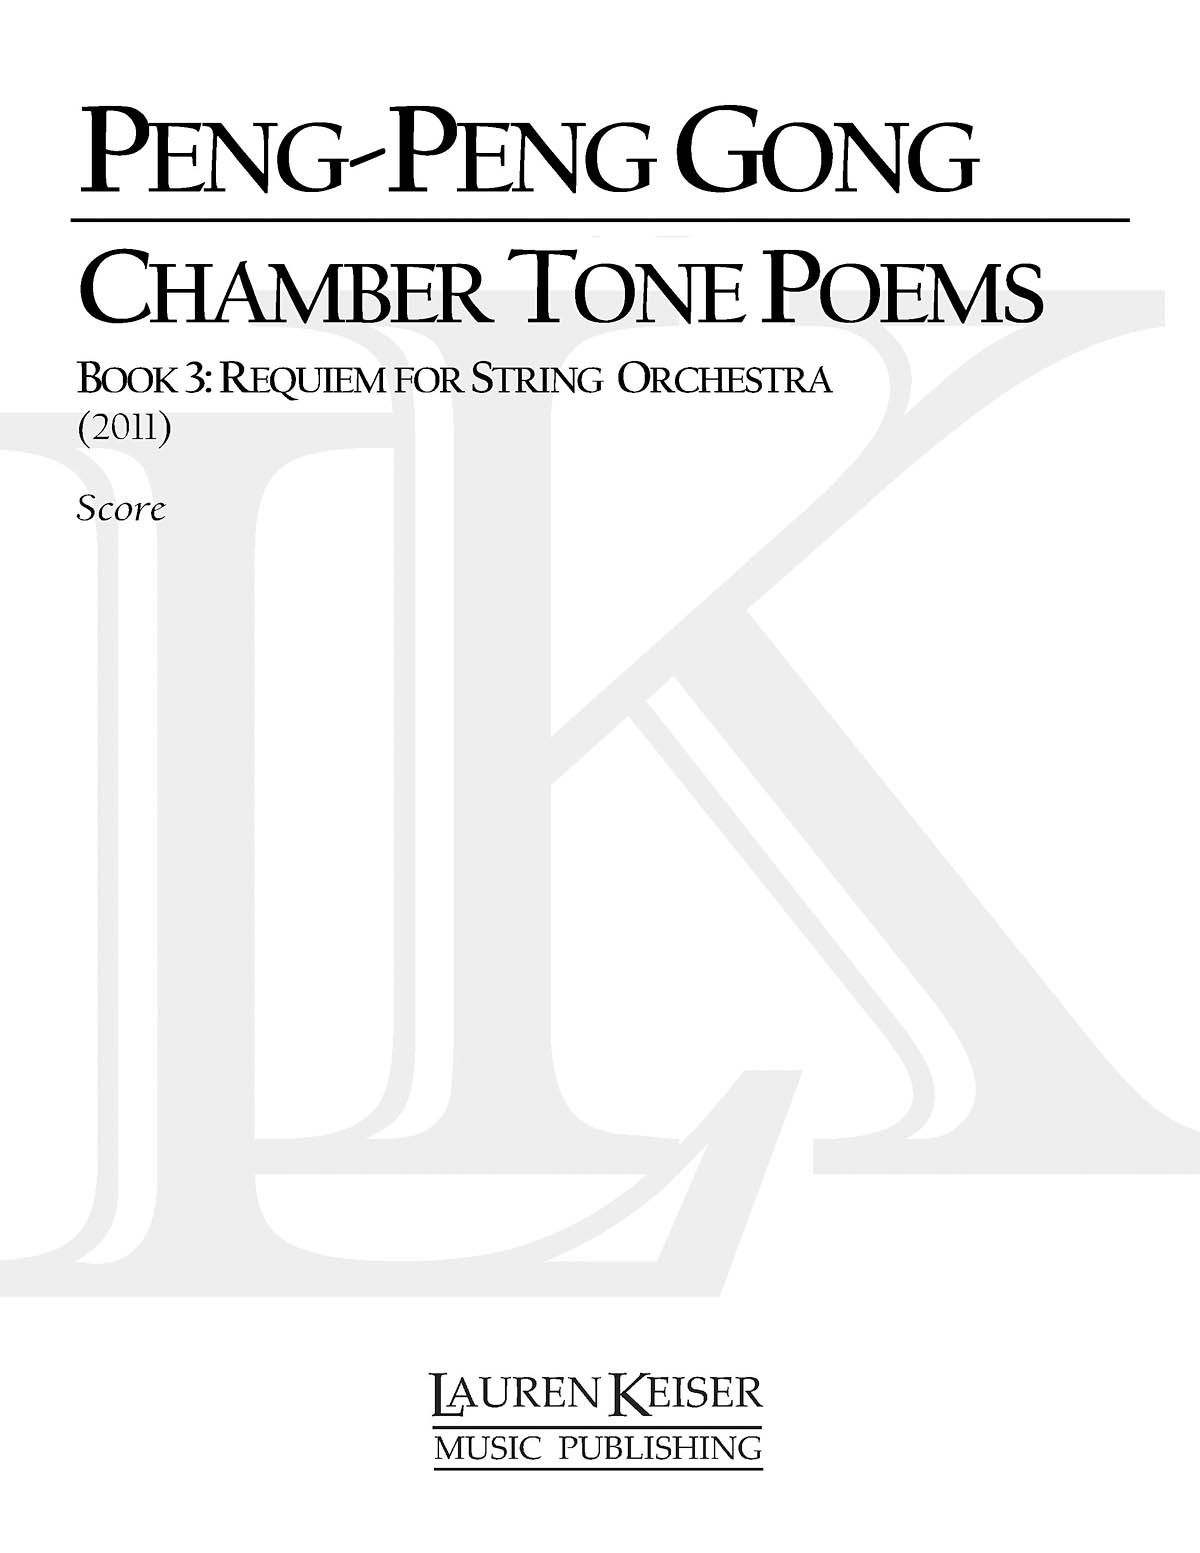 Peng-Peng Gong: Chamber Tone Poems  Book 3: Requiem: String Orchestra: Score